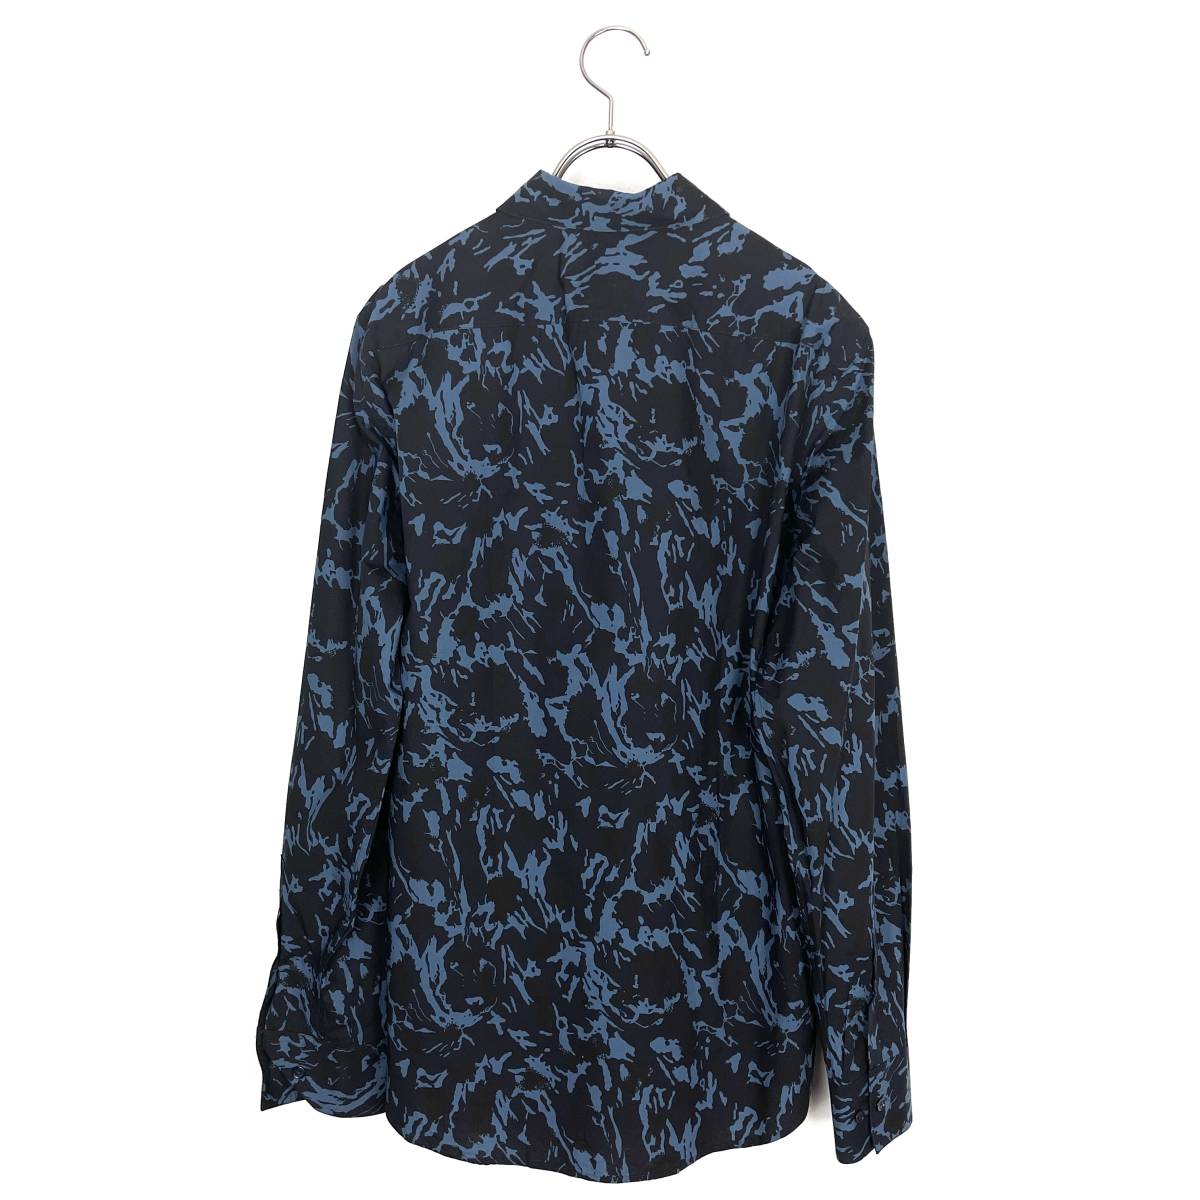 MARNI(マルニ) patterned all over shirts 16SS (navy)_画像3